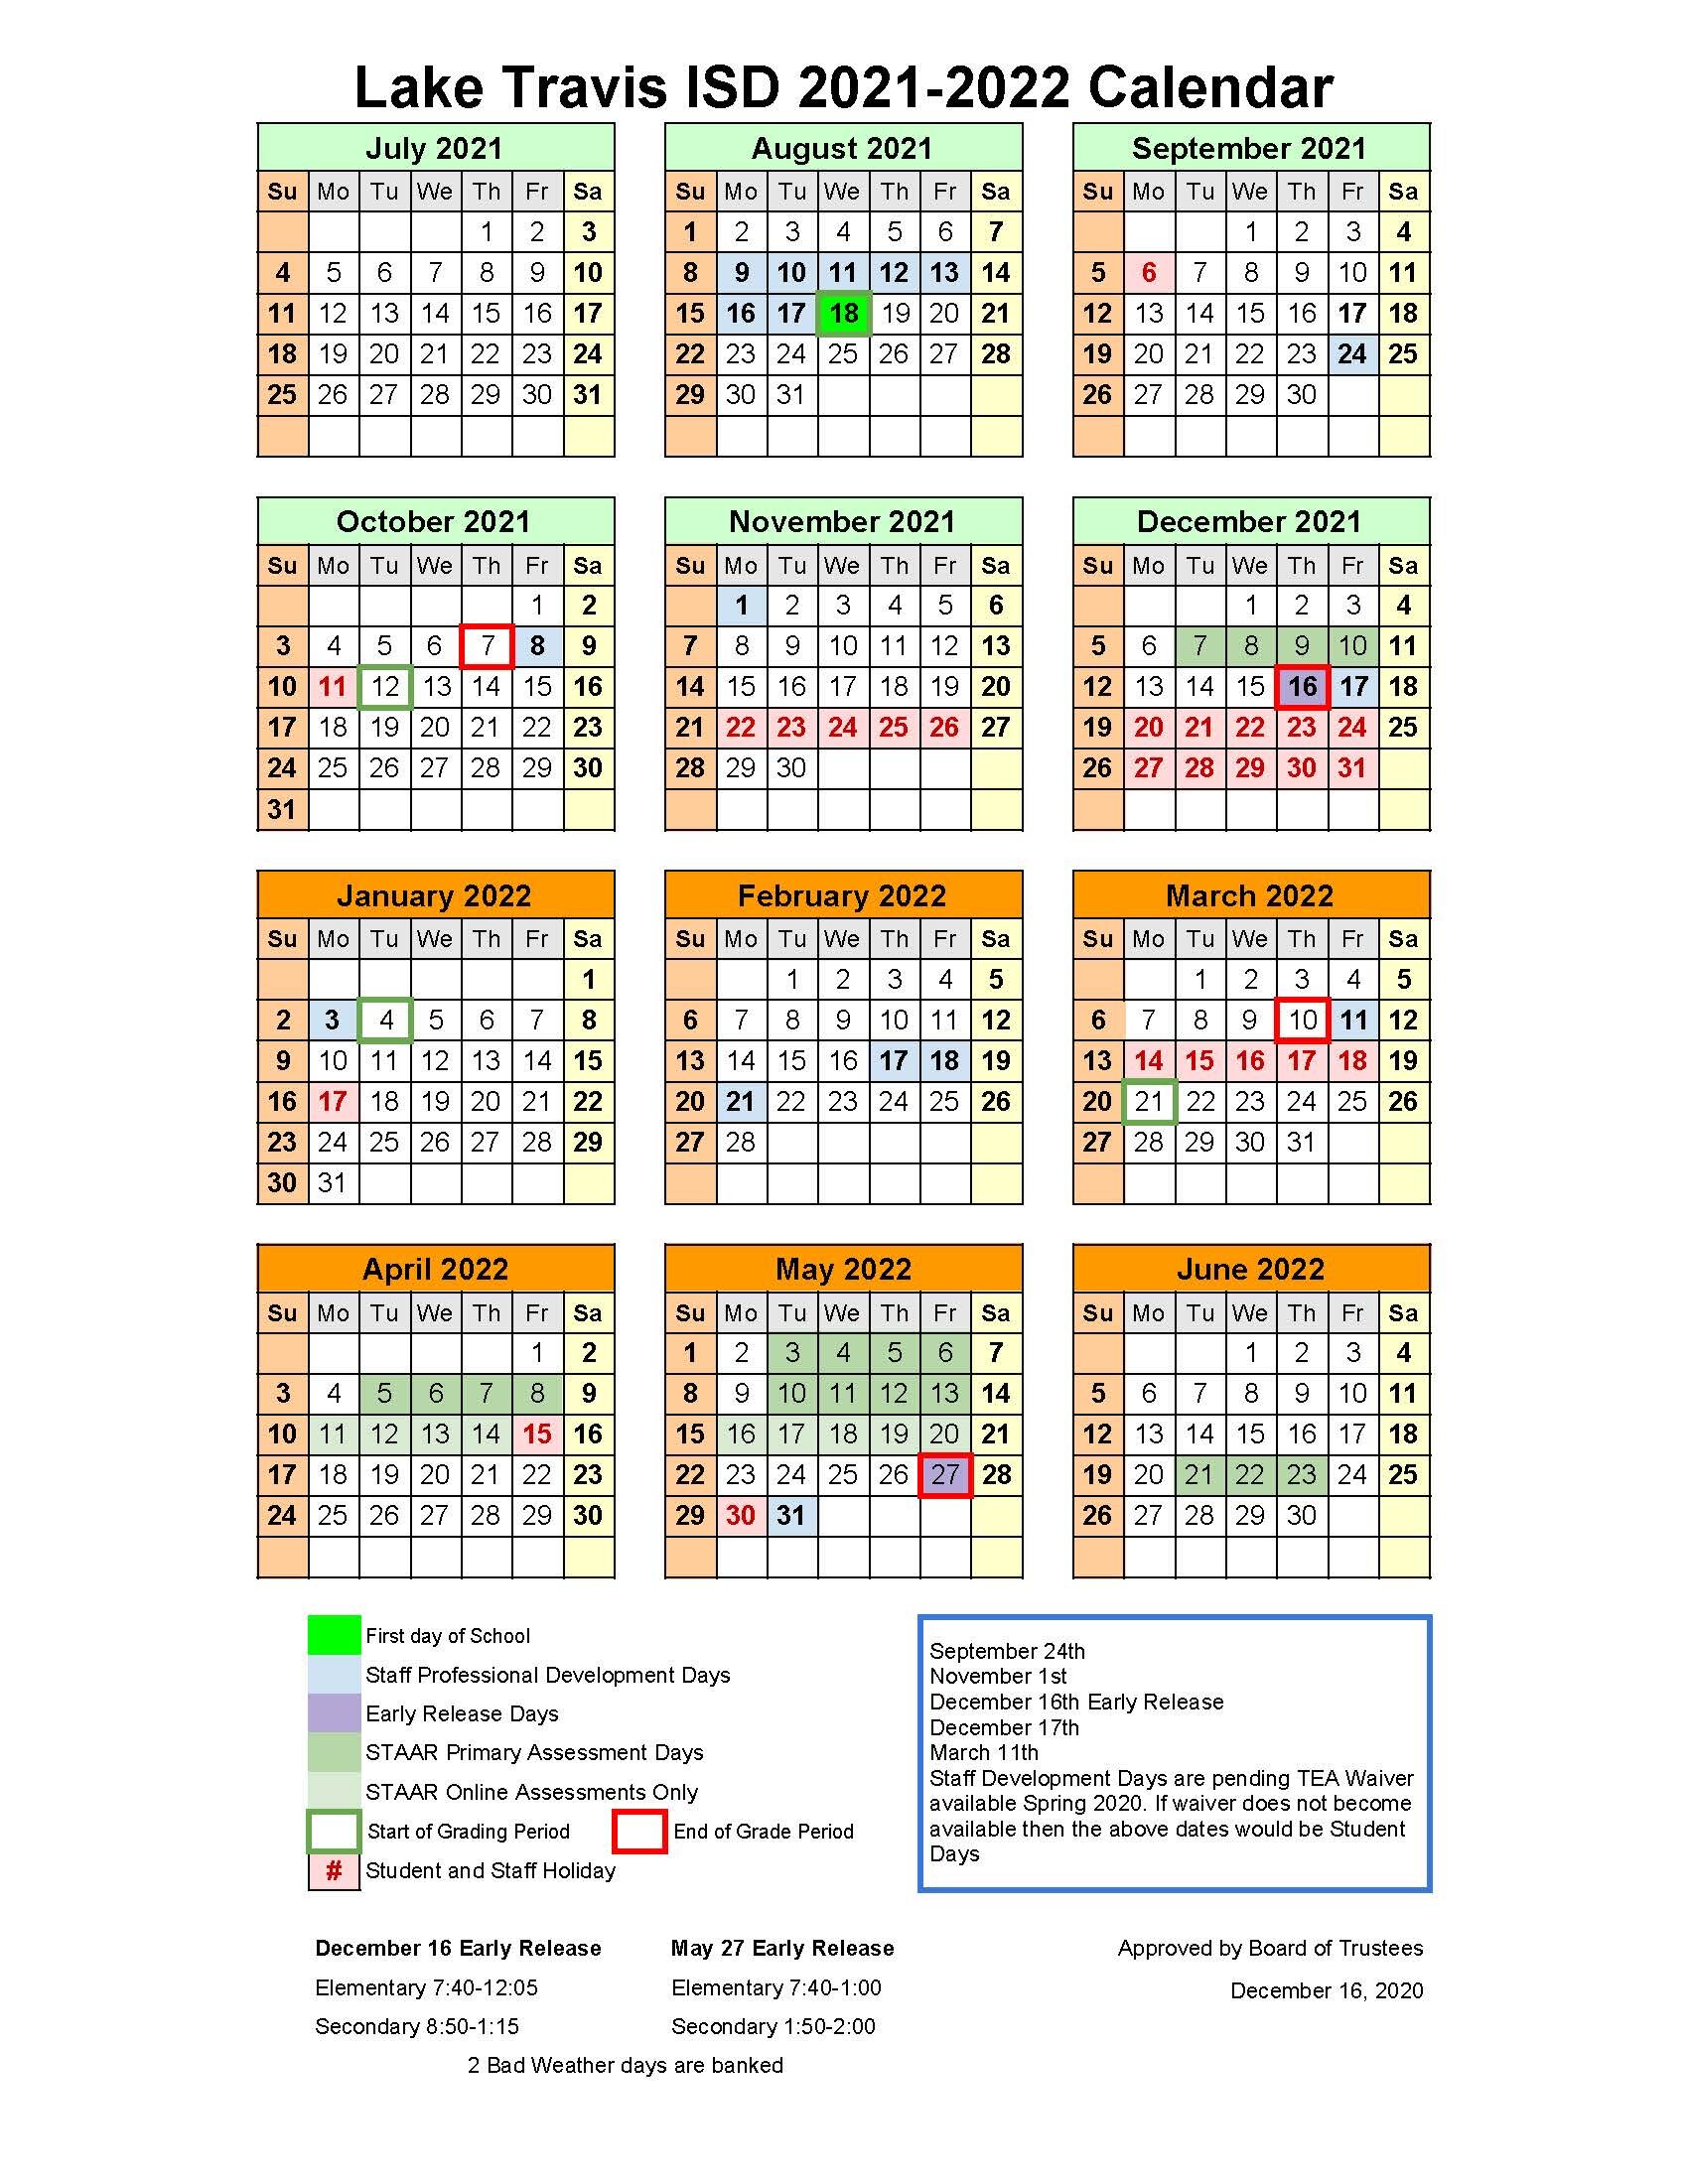 Board Adopts Ltisd 2021 2022 Instructional Calendar Pending Waiver Currents